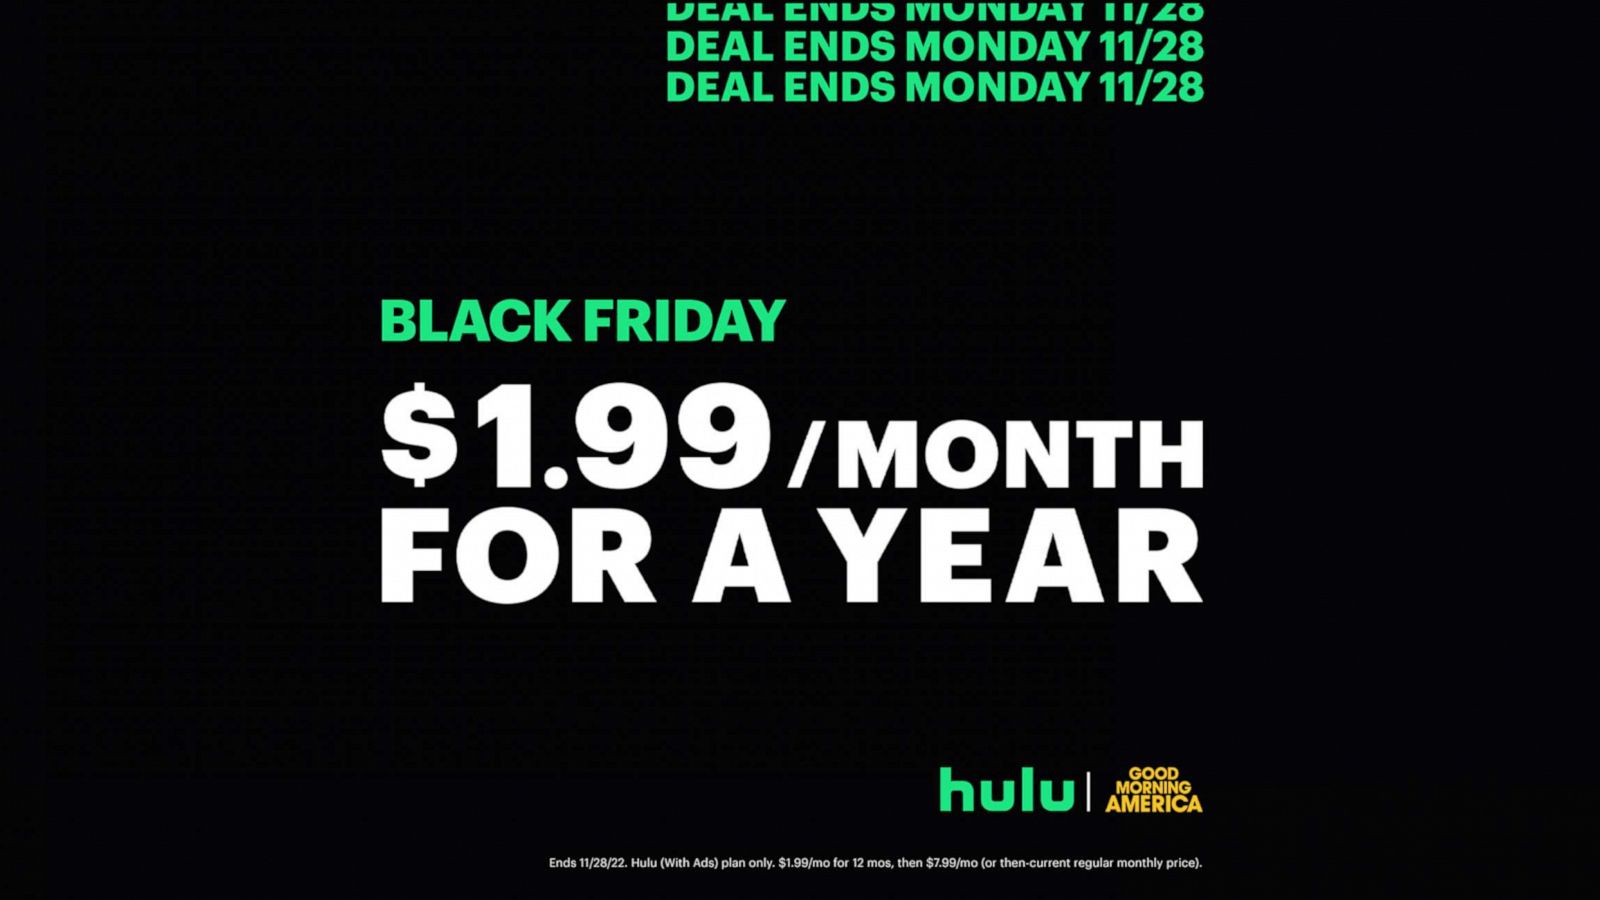 Last chance for Cyber Monday! Get Hulu for $1.99 per month for a year